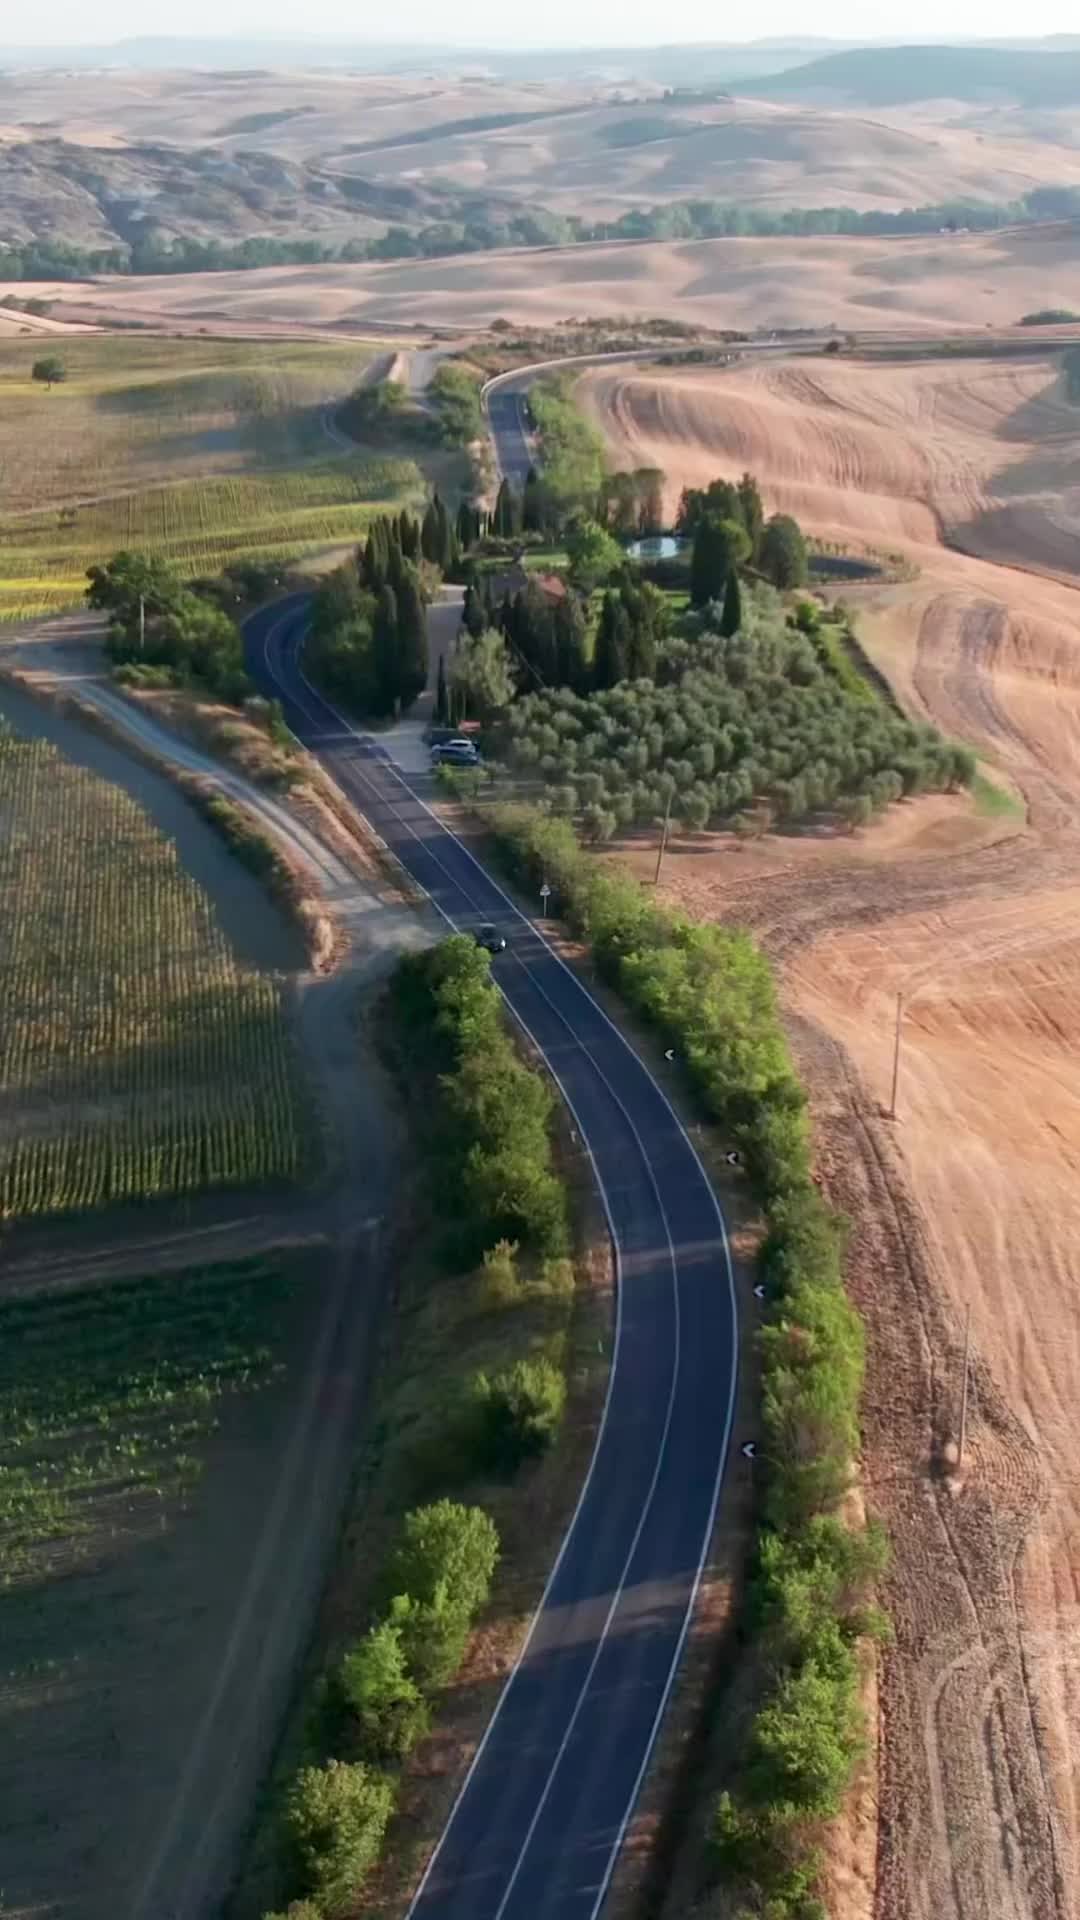 Val d'Orcia Street: Scenic Drive Through Tuscany